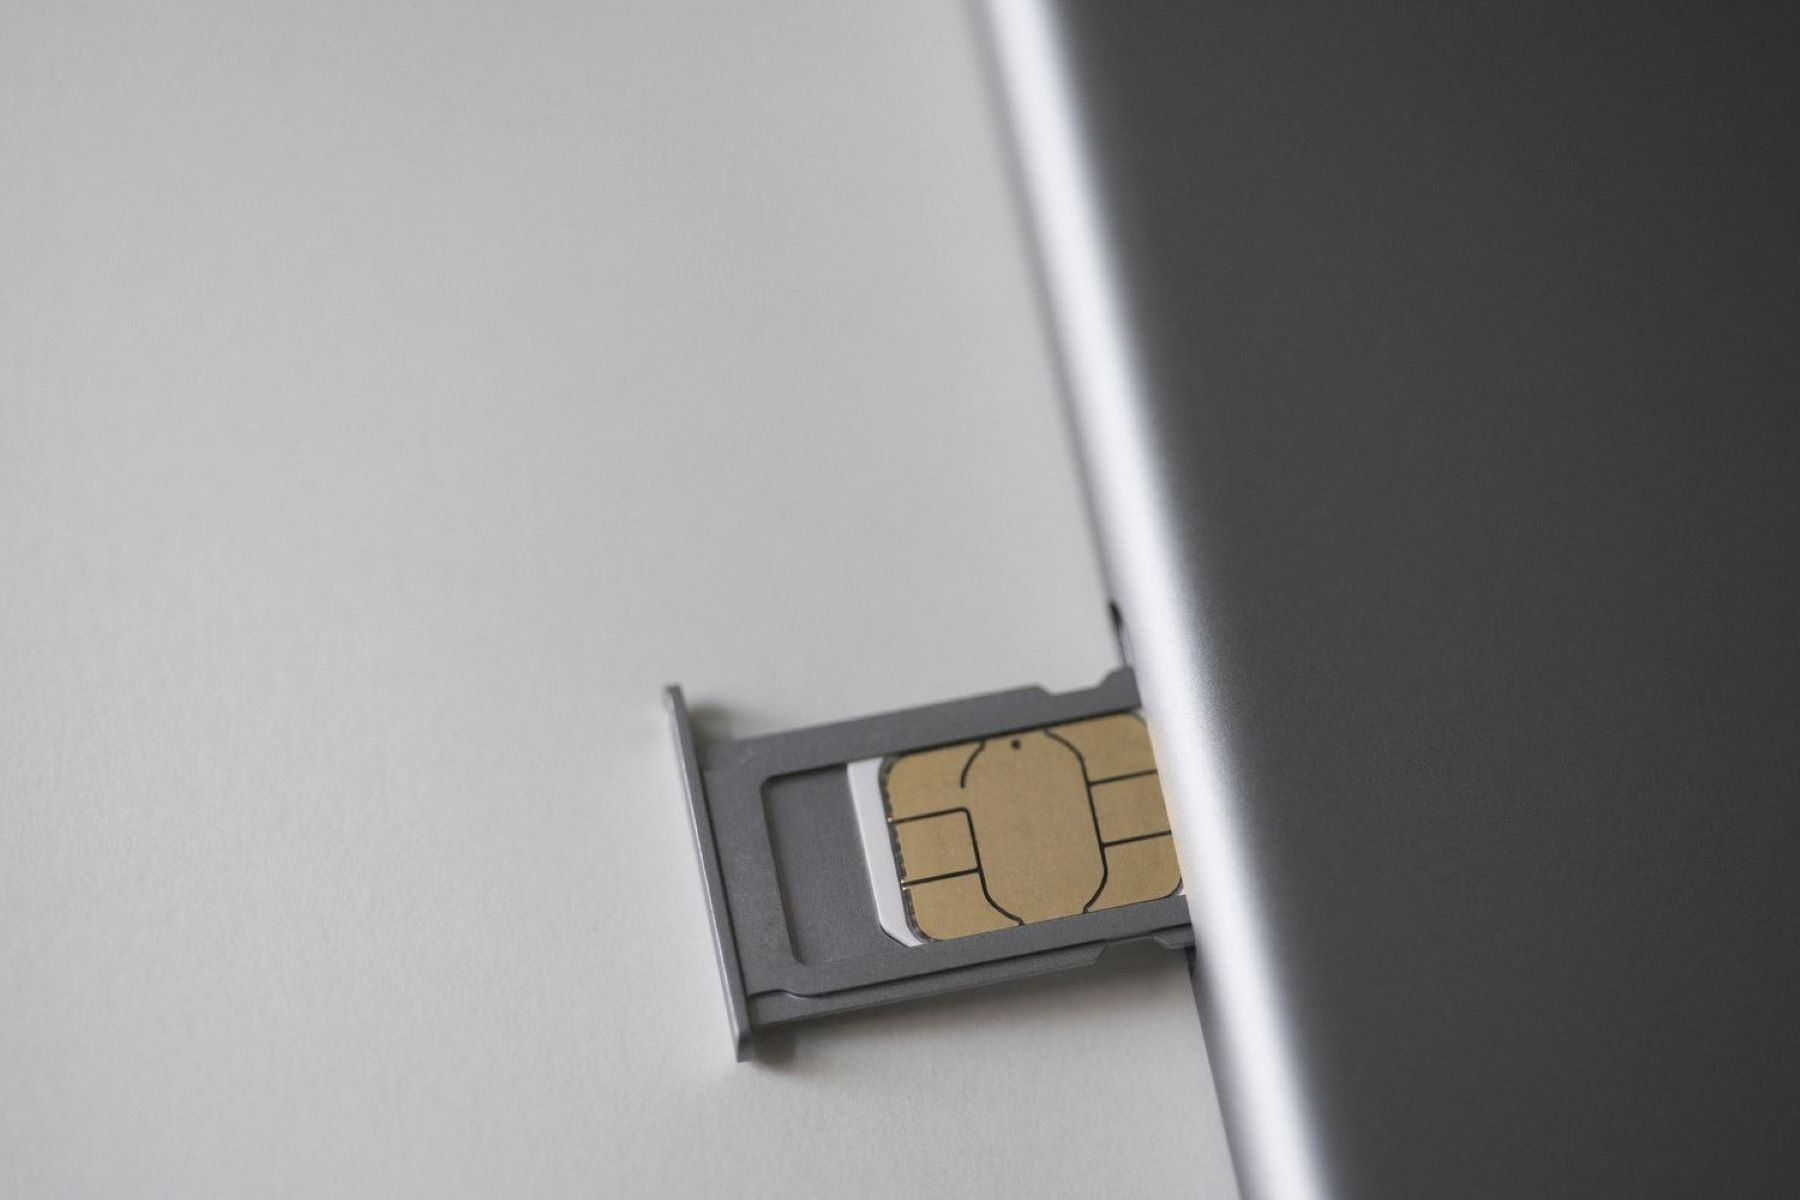 sim-card-replacement-changing-sim-card-on-iphone-10